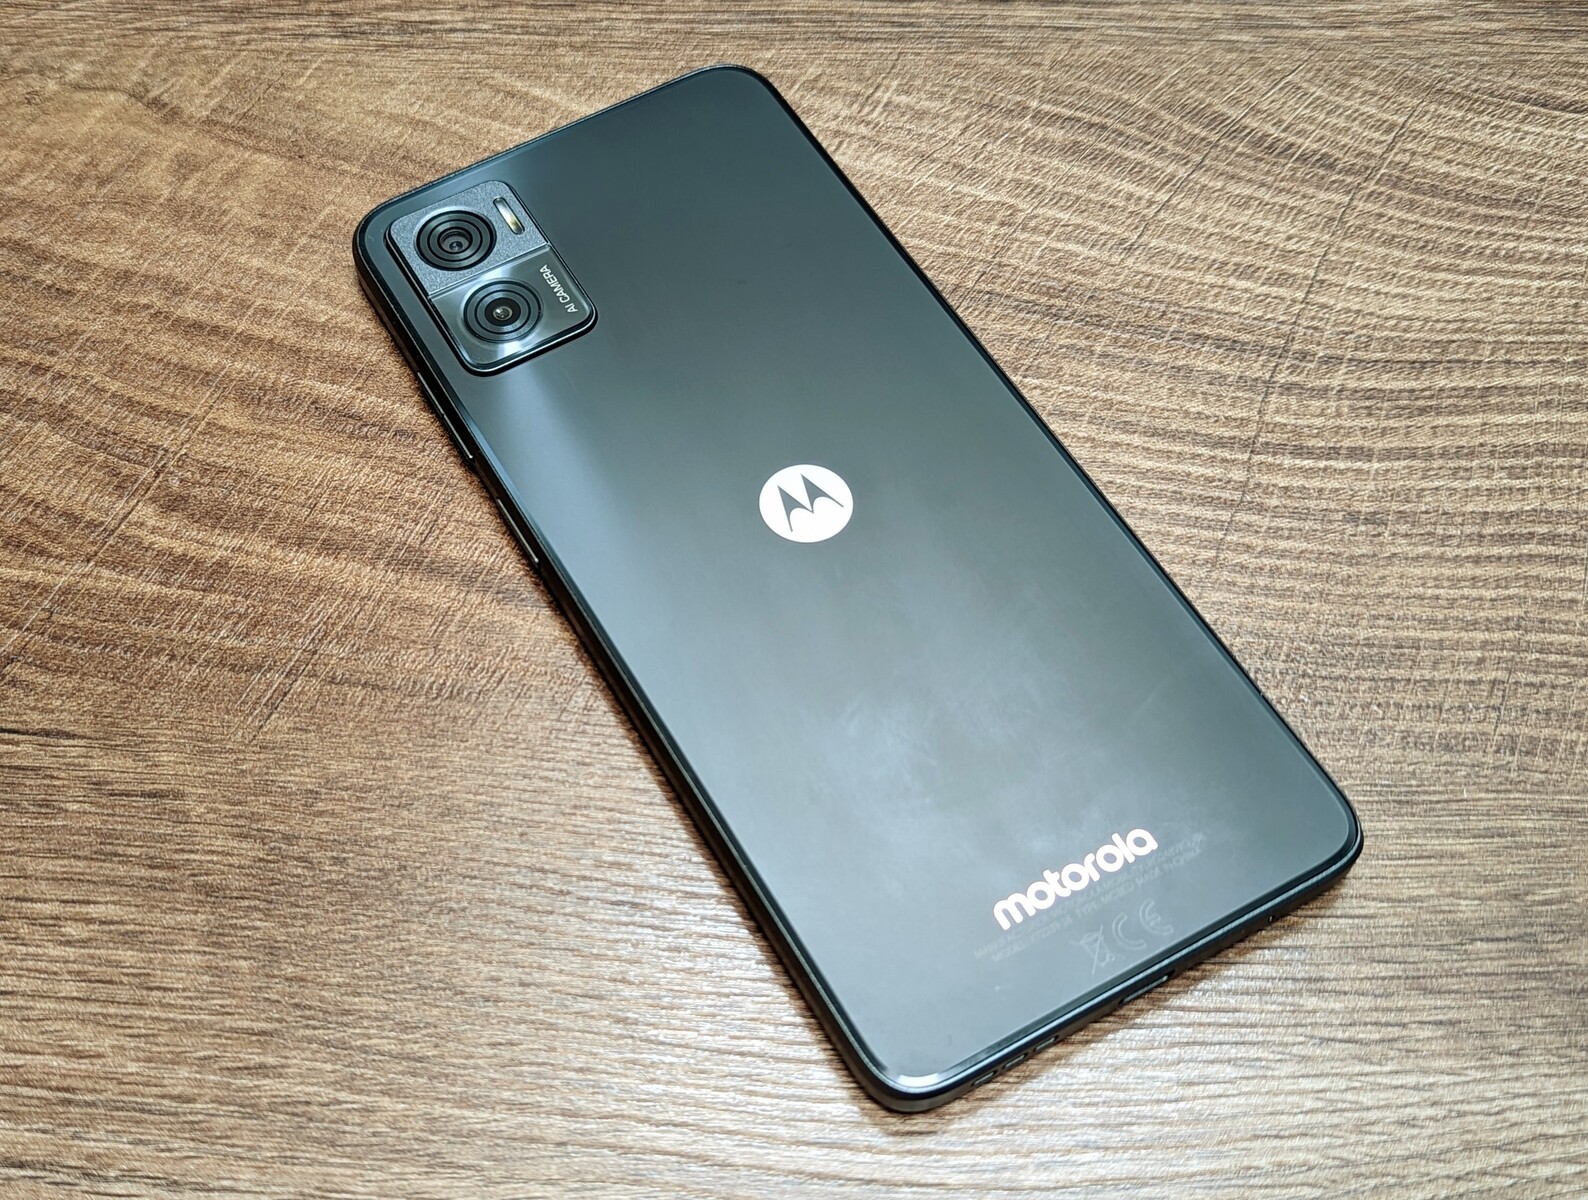 Motorola Moto smartphone review - Special phone for little money - NotebookCheck.net Reviews